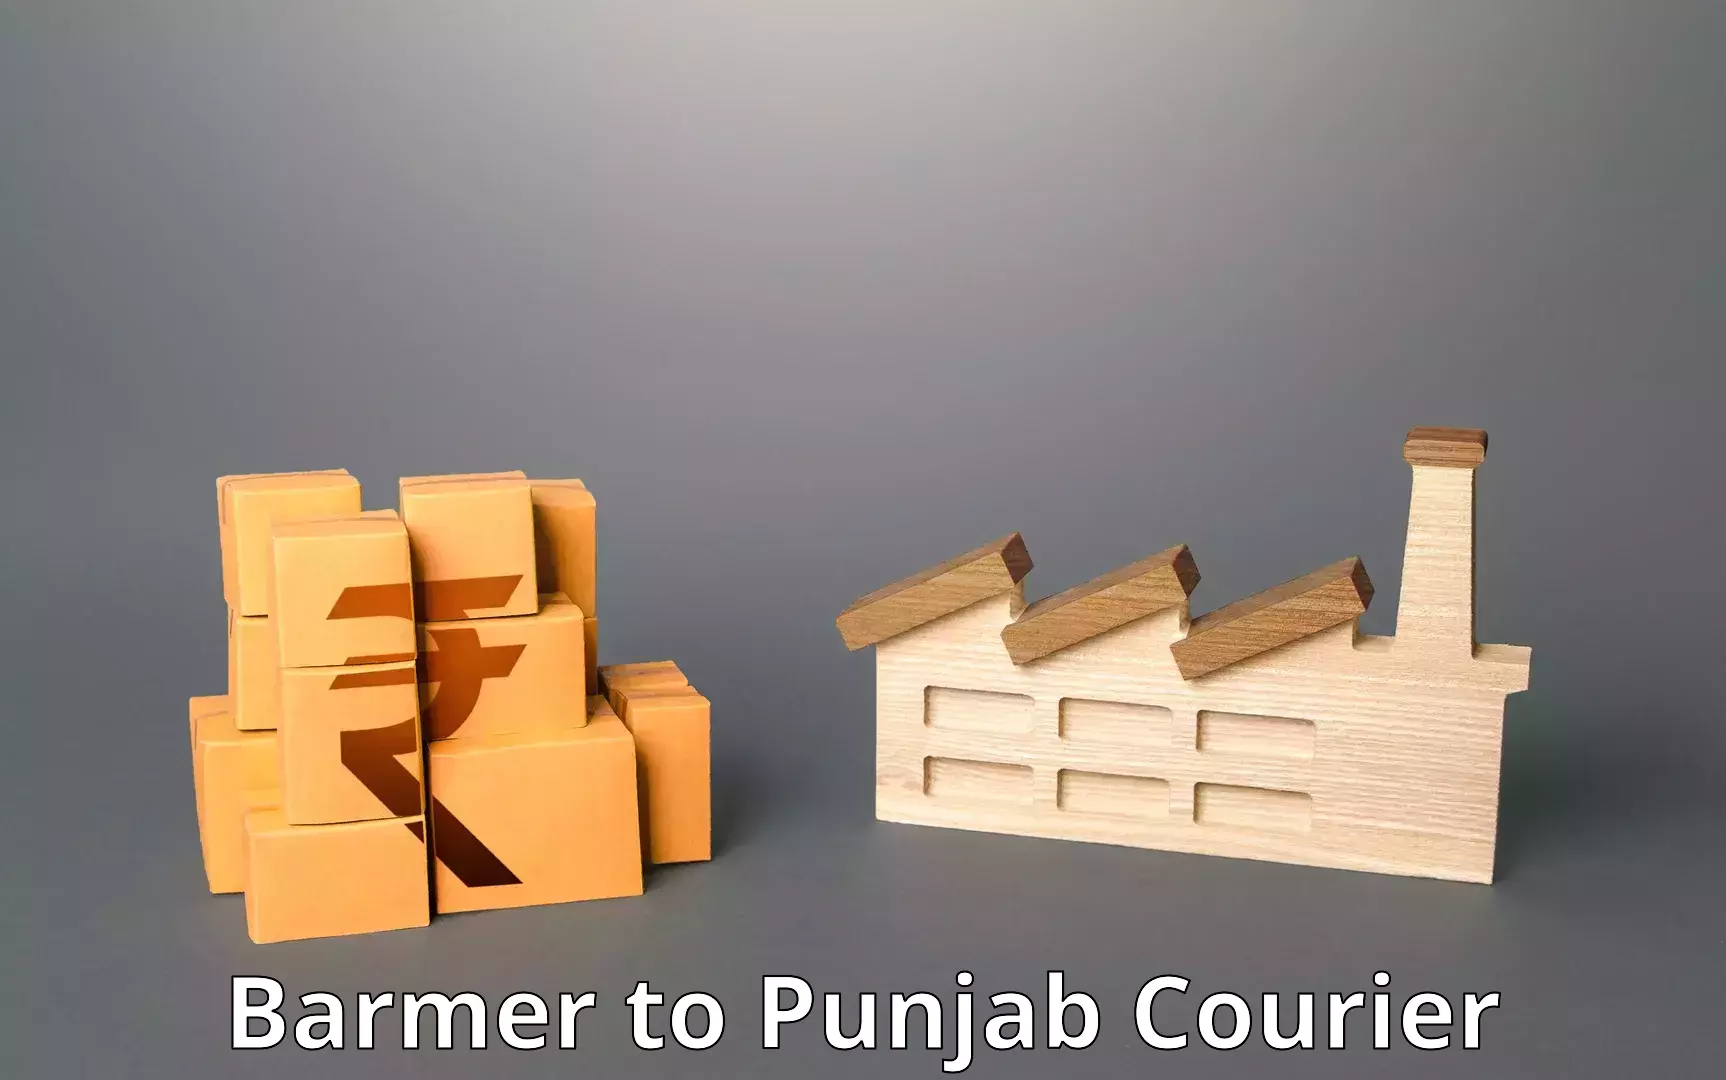 End-to-end delivery Barmer to Barnala